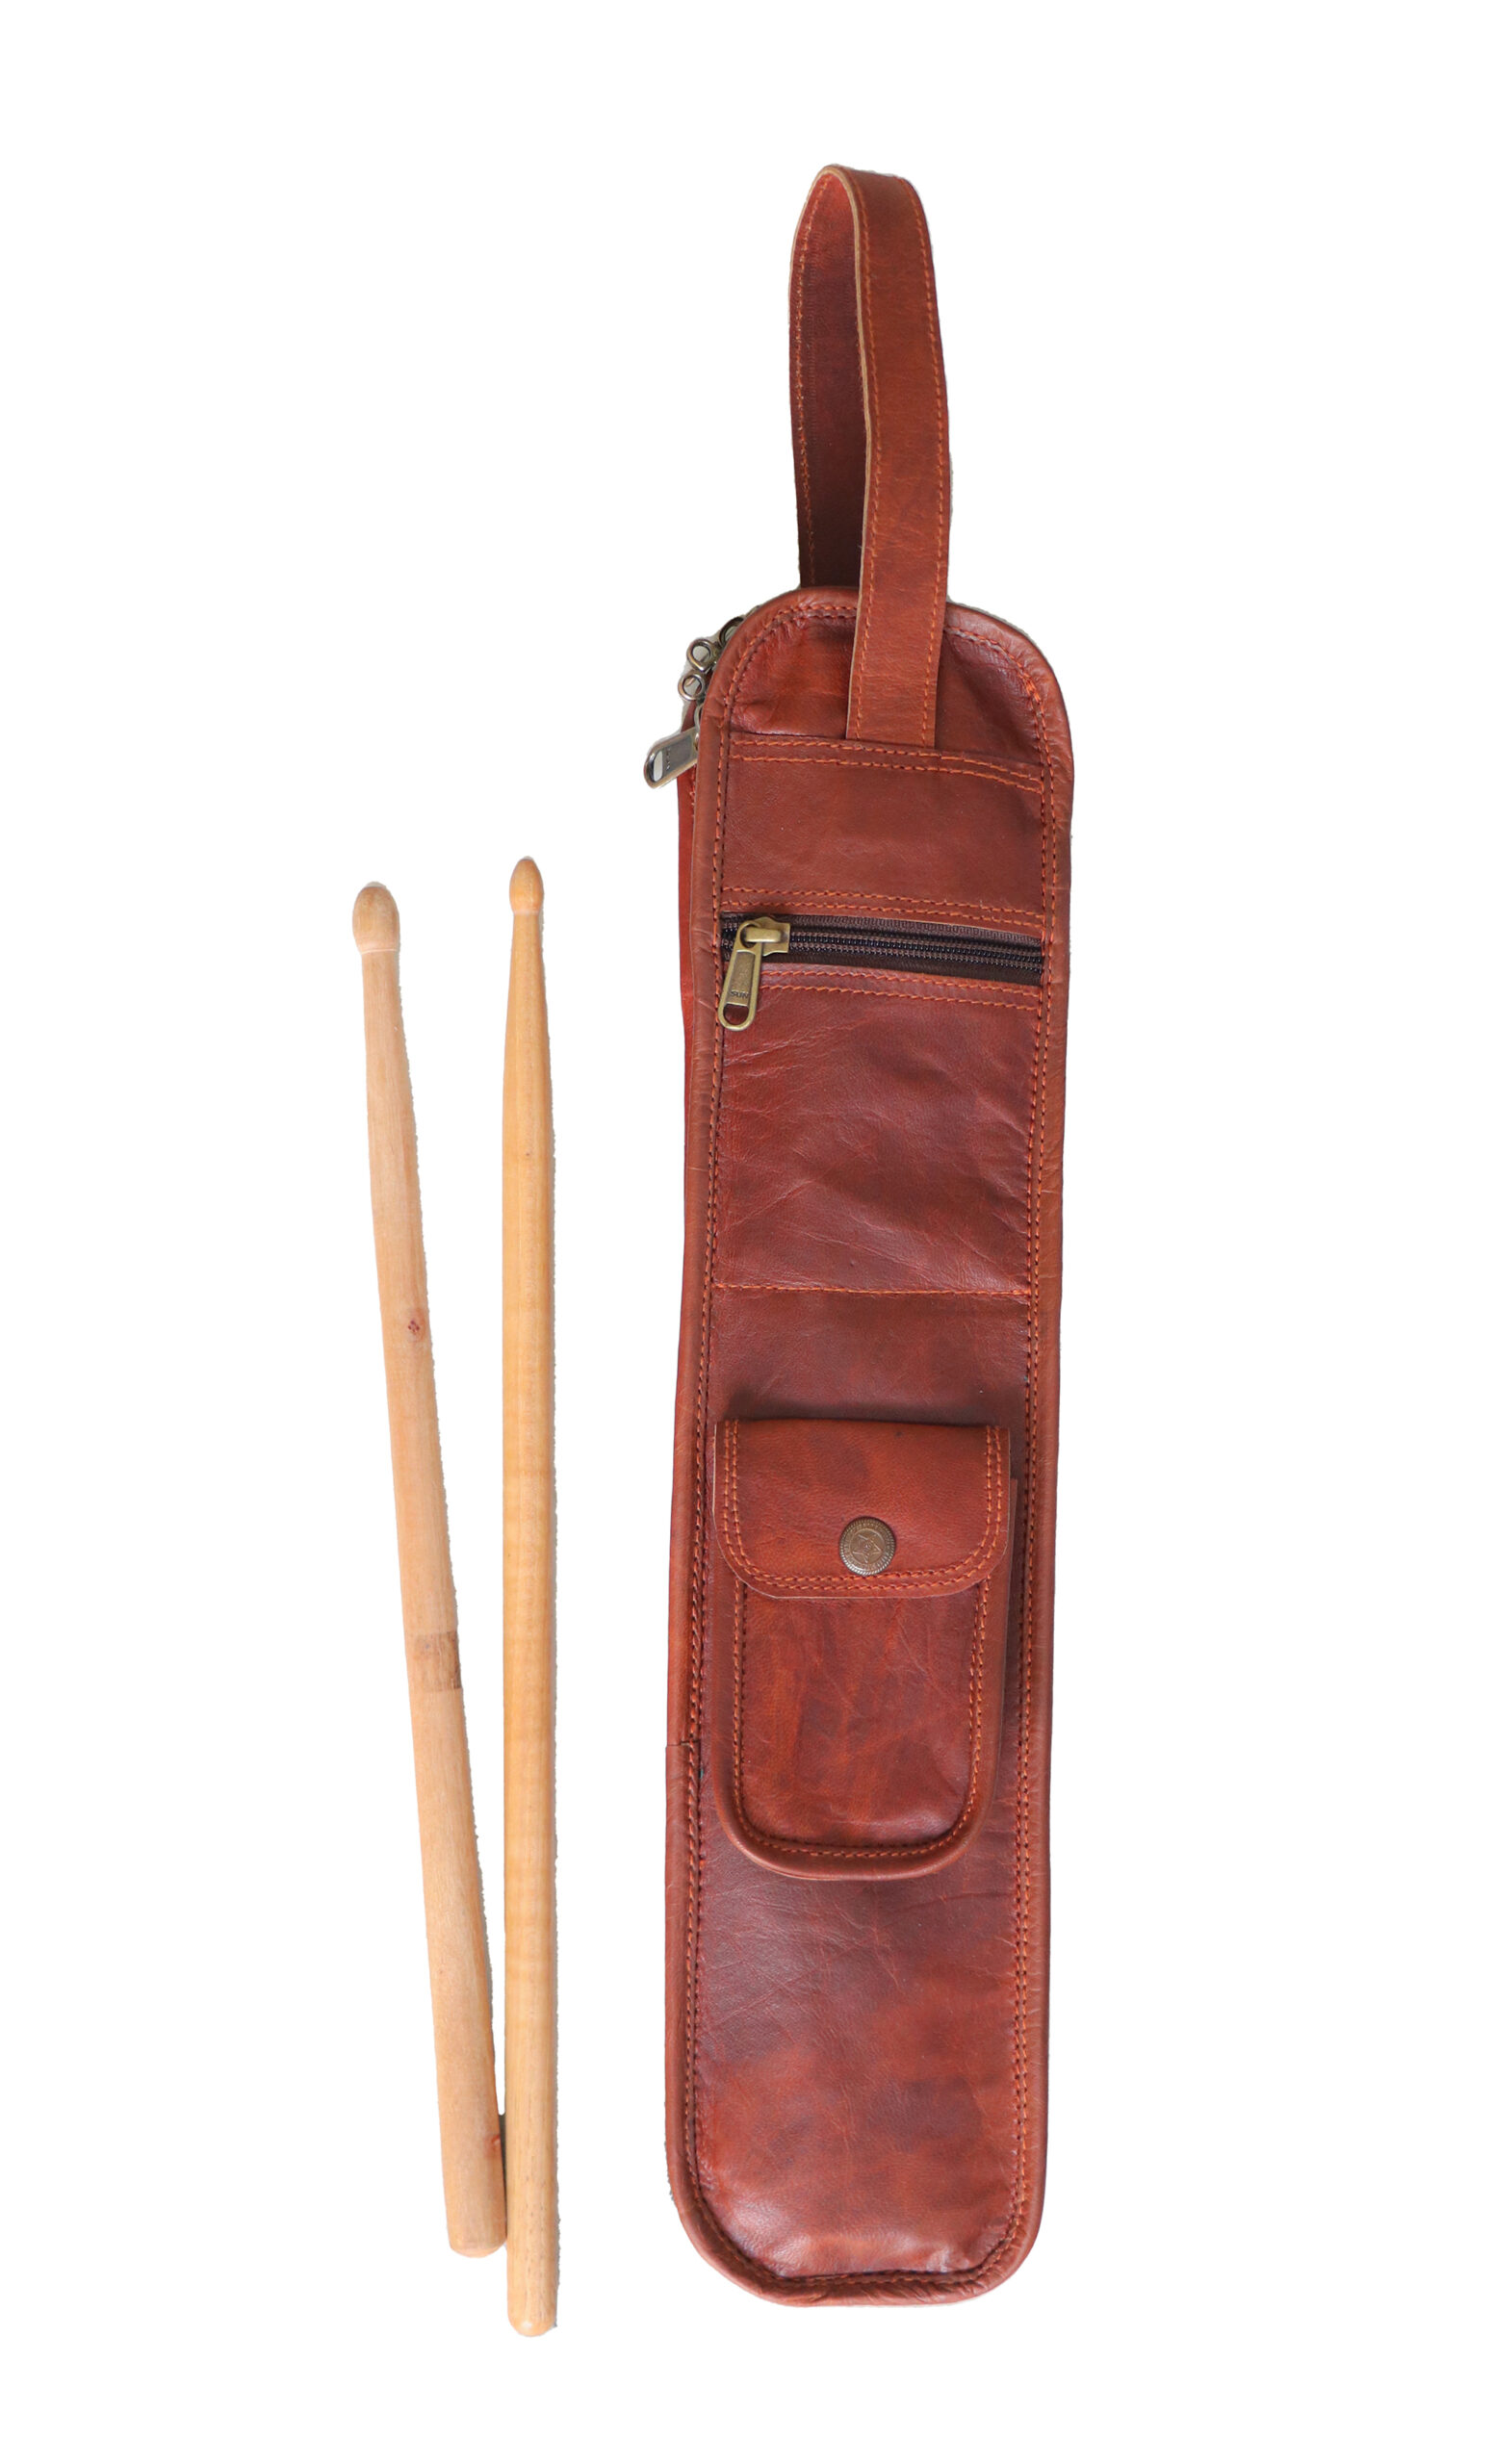 Meinl Percussion Meinl Drum Stick Bag with Pocket, Hooks - Black India |  Ubuy